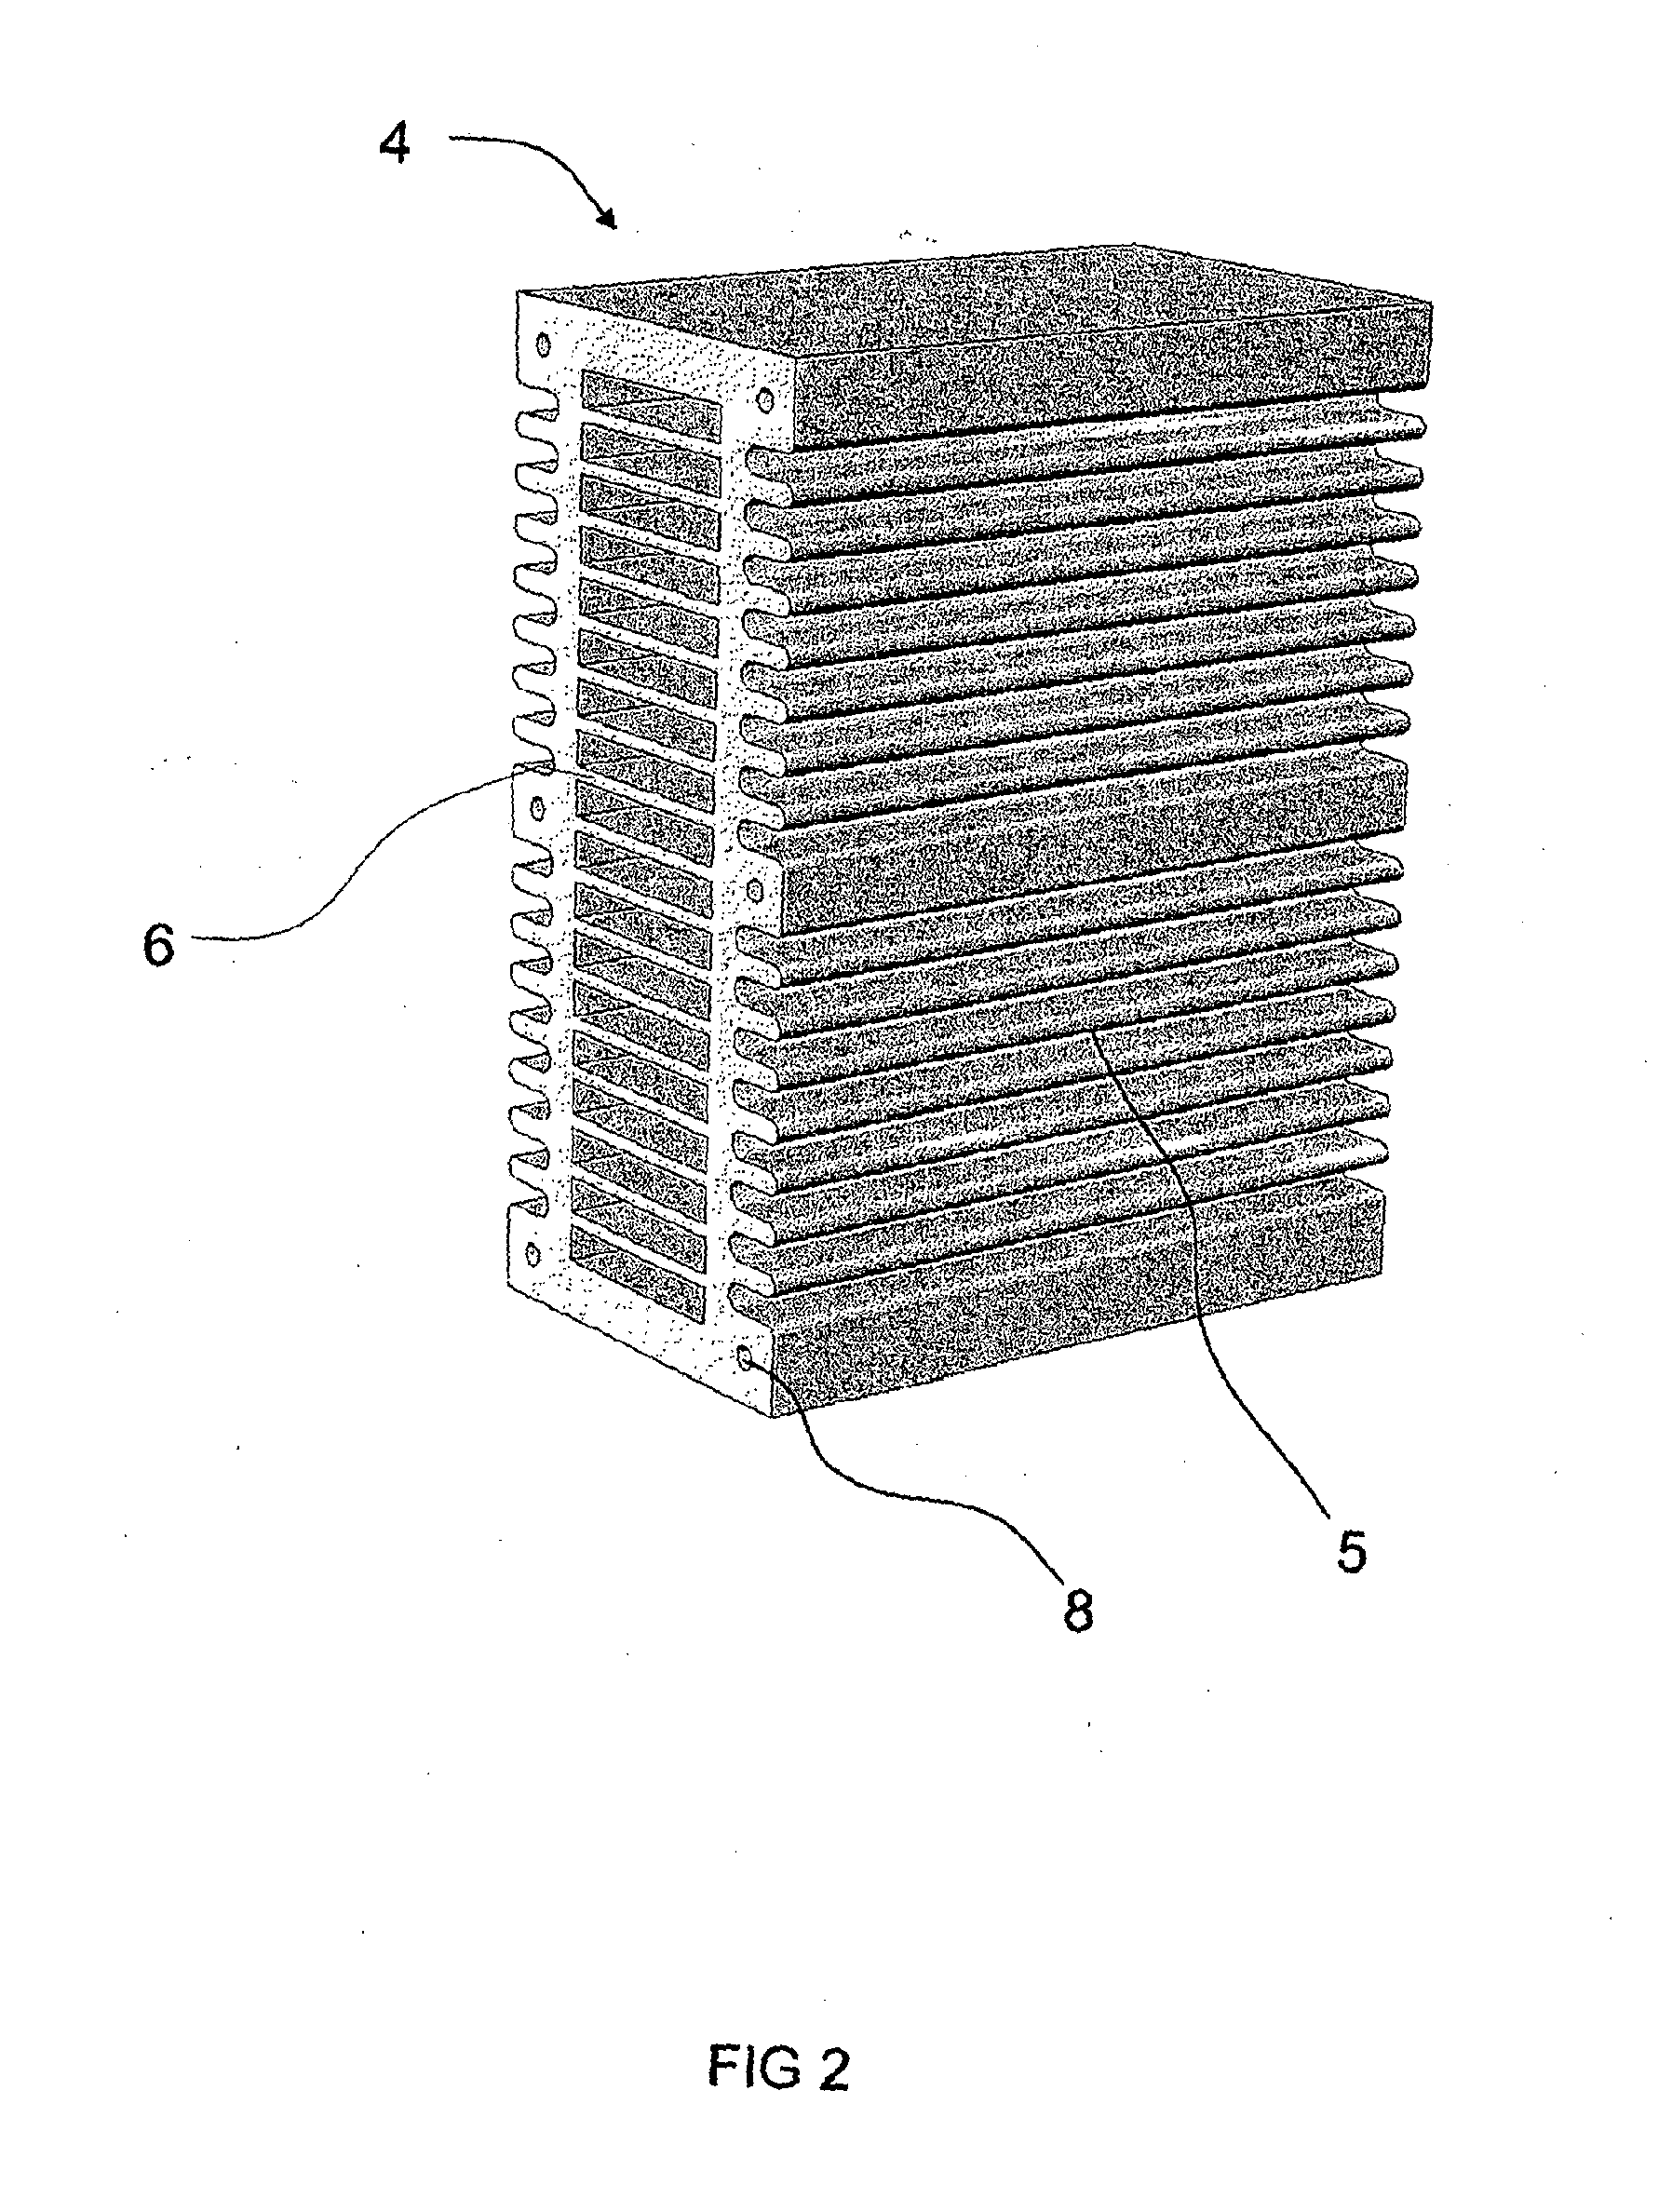 Battery-operated welding and/or cutting device and a cooling profile